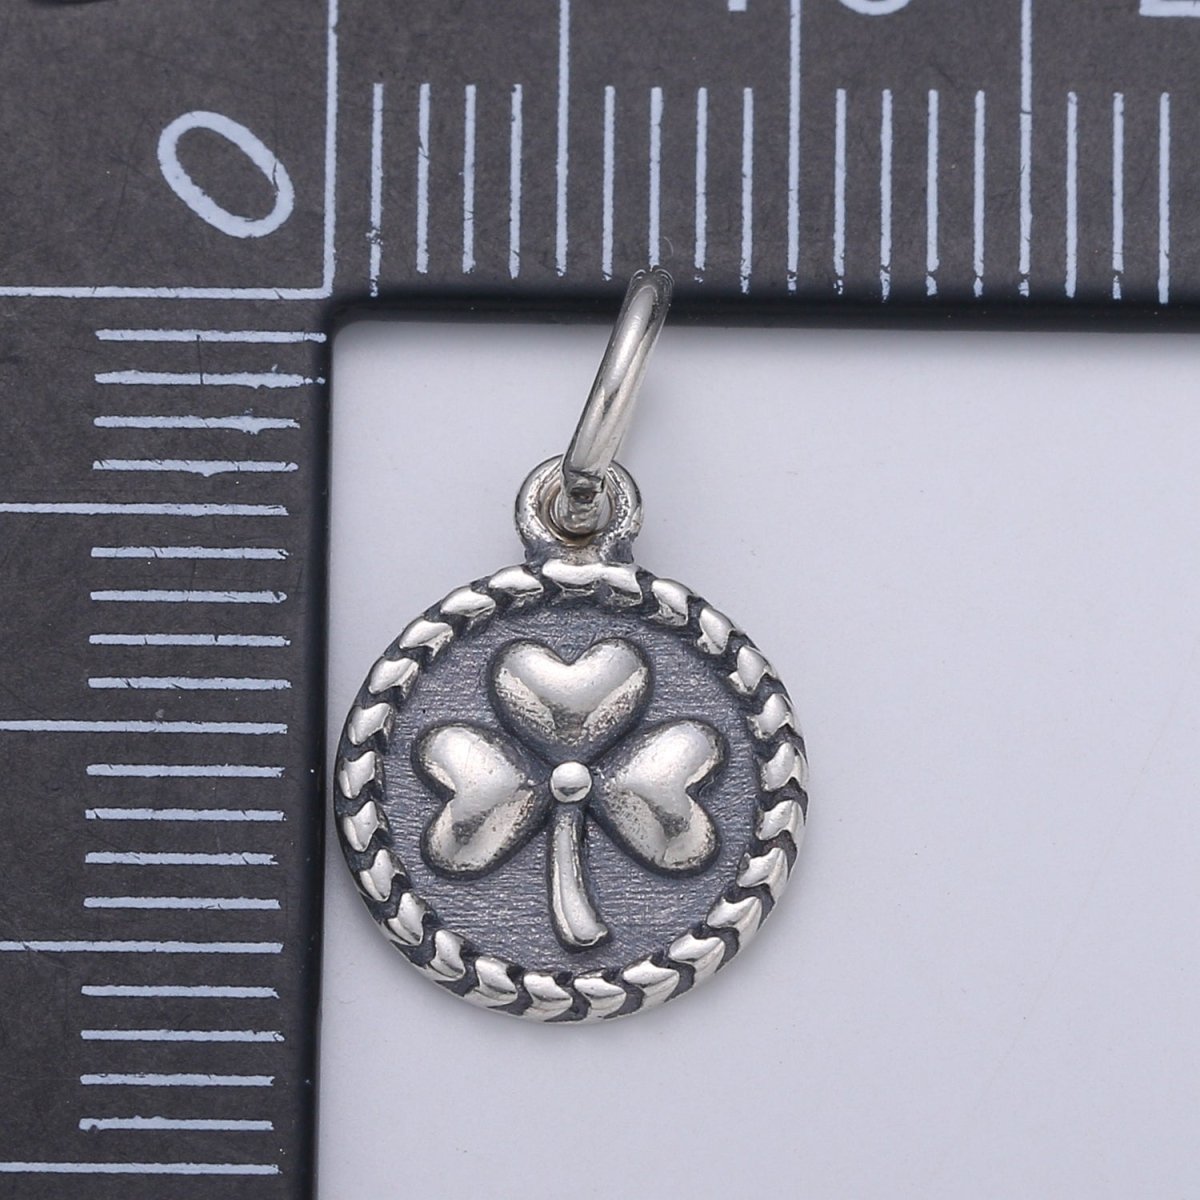 925 Sterling Silver Three Leaf Clover Charm, Message Charm Silver Happy Charm for Necklace Bracelet Earring, Good Luck Charm SL-103 - DLUXCA